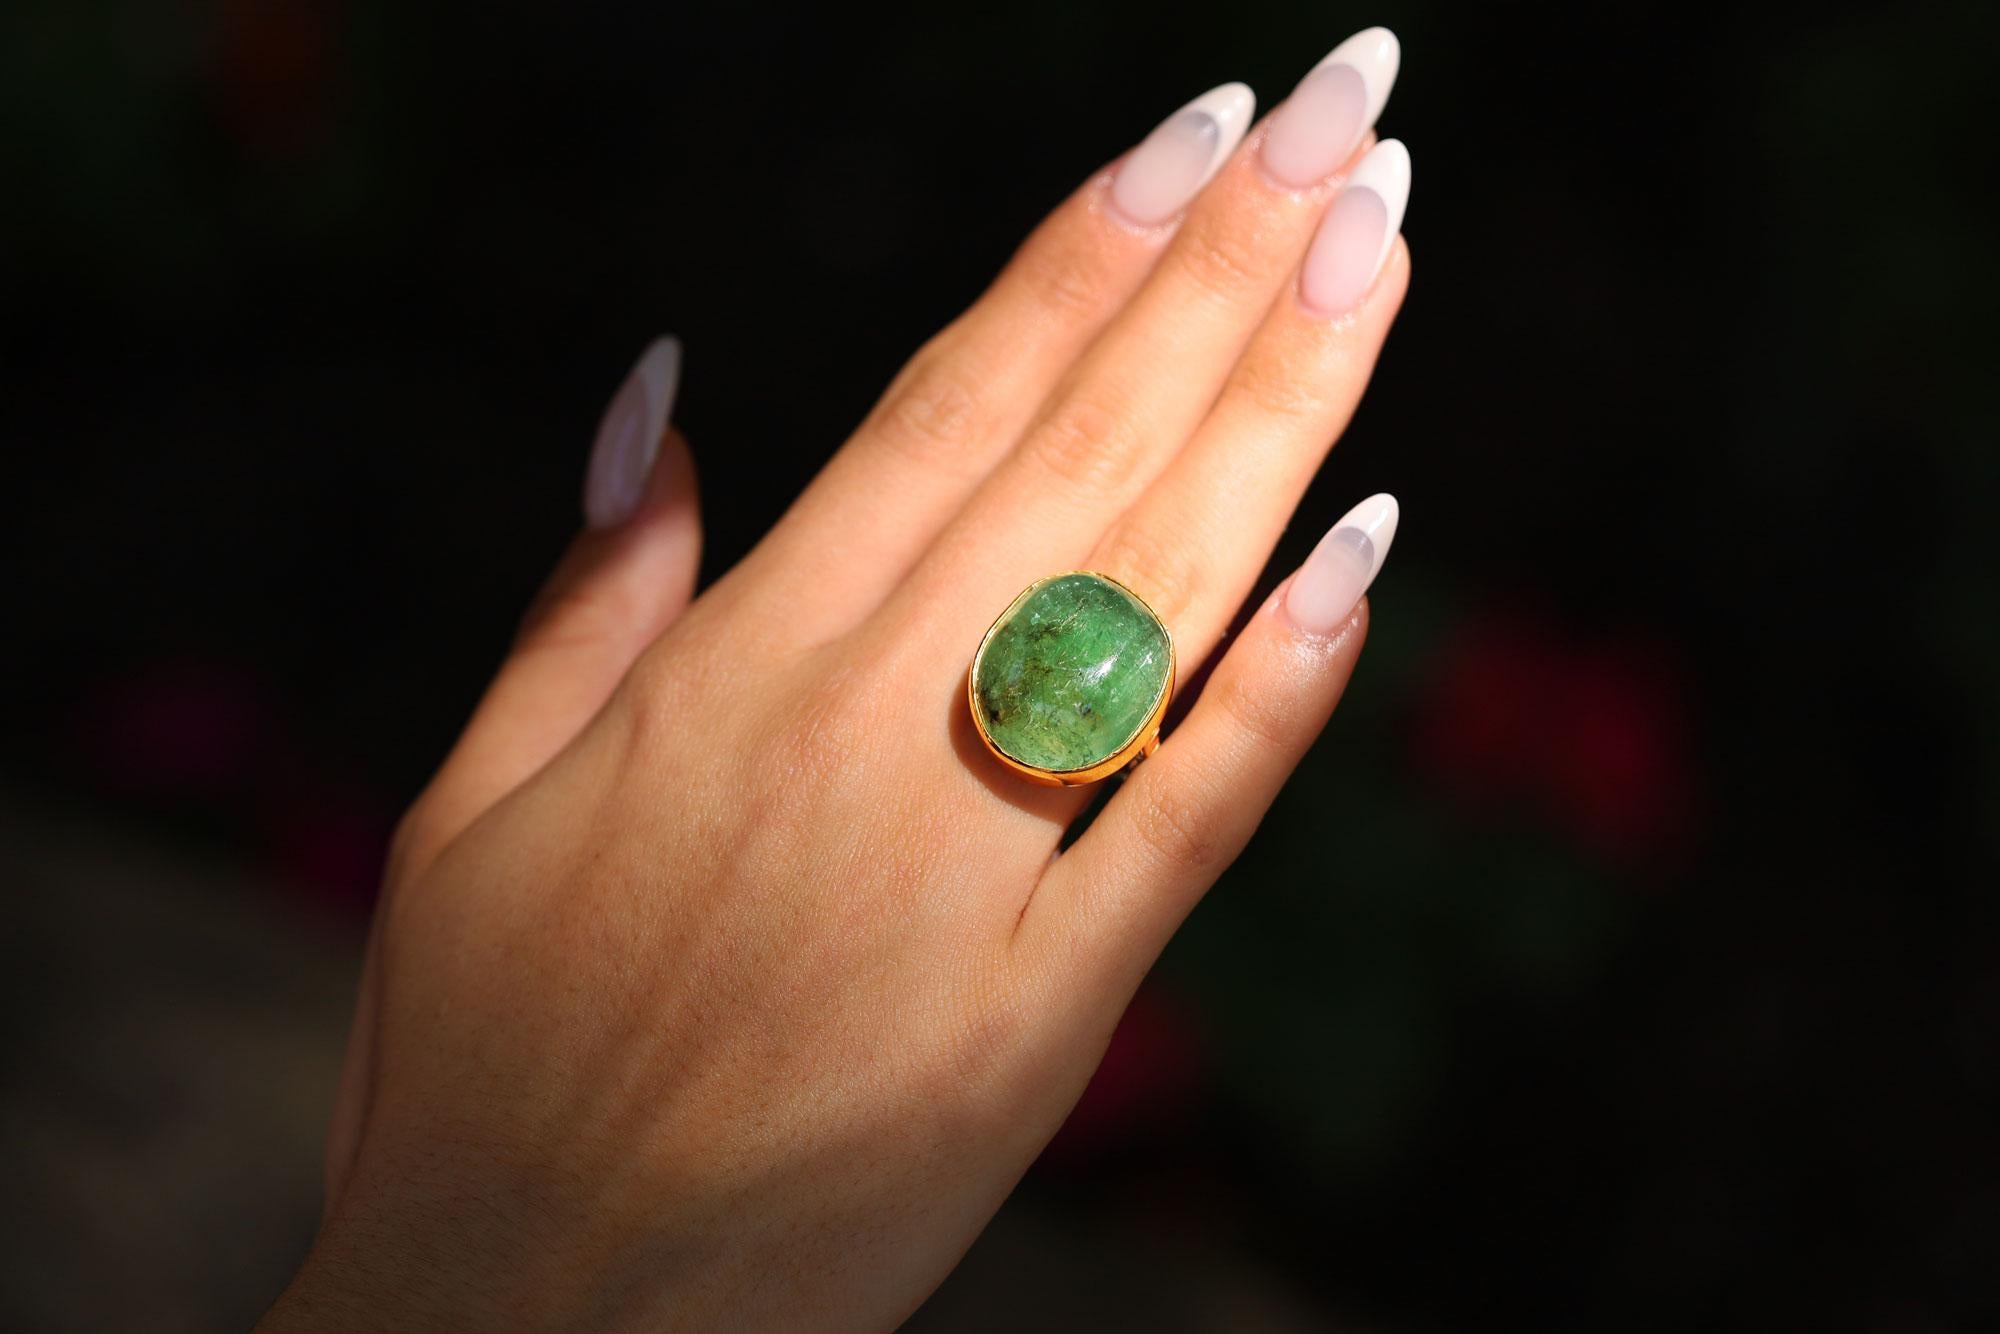 A gift from Hollywood legend Robert Mitchum to his wife Dorothy, this circa 1960s cocktail ring is a treasure for the ages. Centering upon a glowing green beryl gemstone of a significant 33 carats in weight and surrounded with an 18k yellow gold